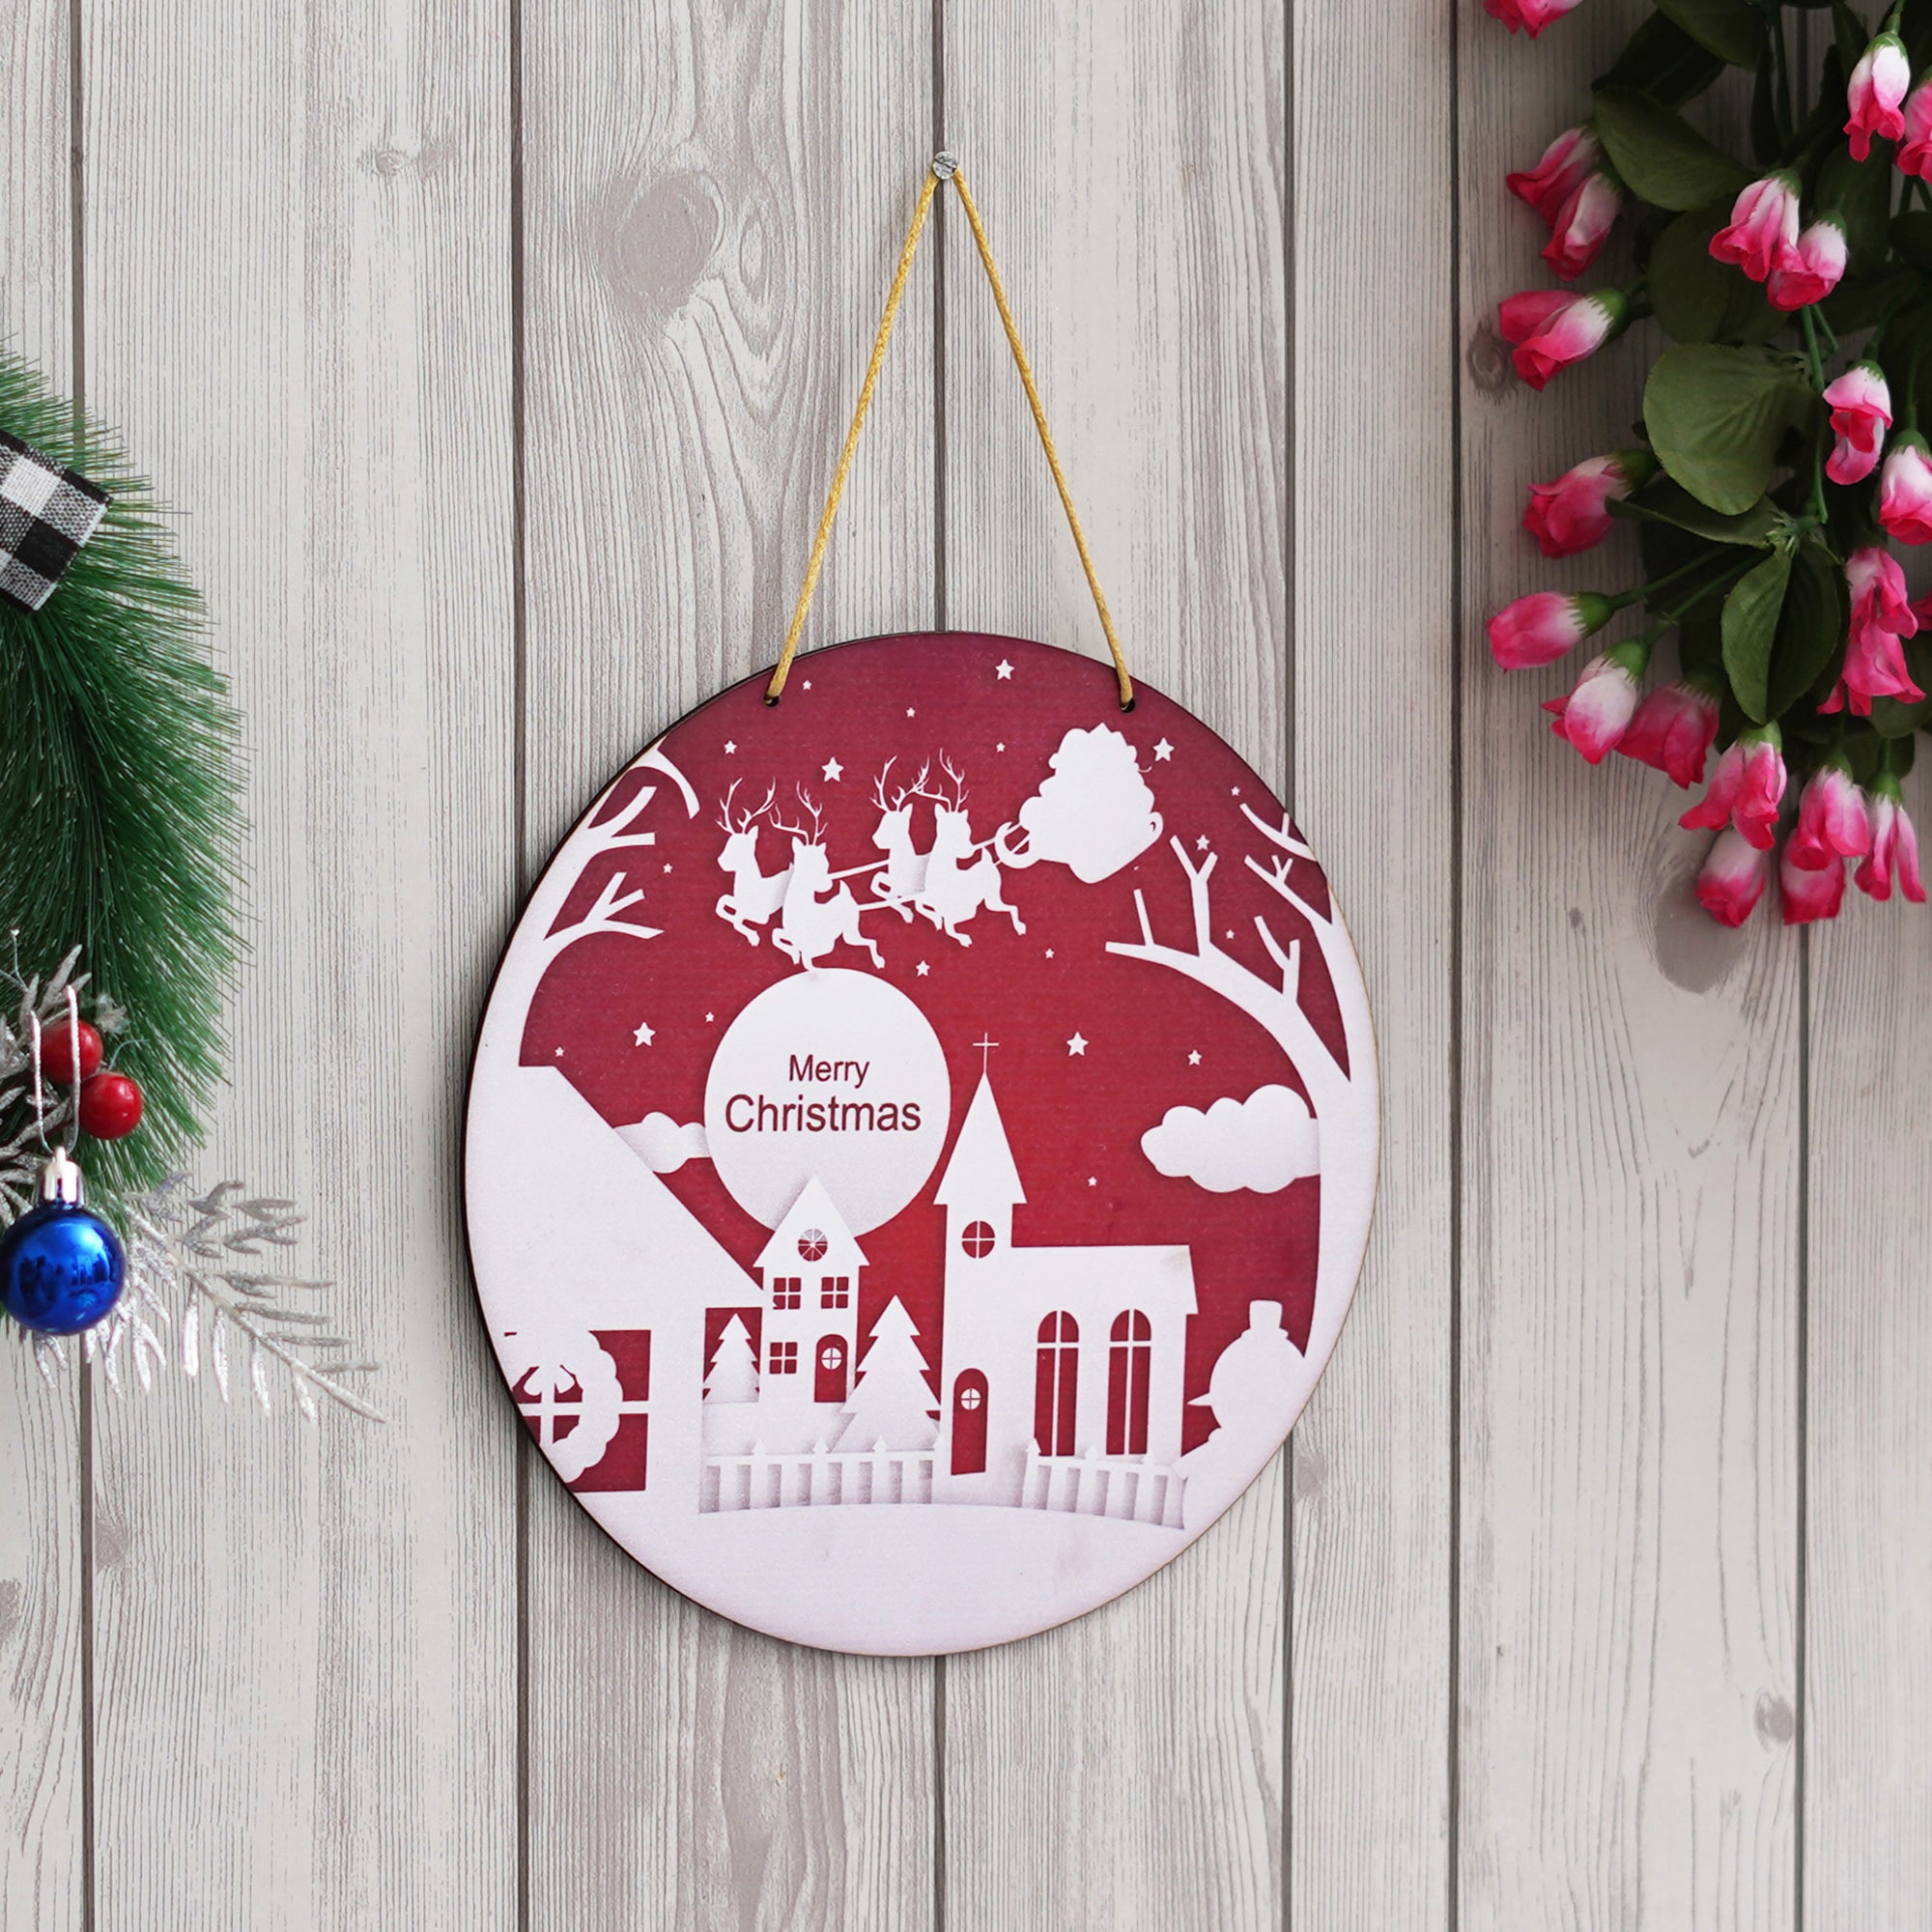 eCraftIndia Merry Christmas and Santa Claus with sleigh and reindeer Printed Door Wall Hanging for Home and Christmas Decoration (Red, White) 5